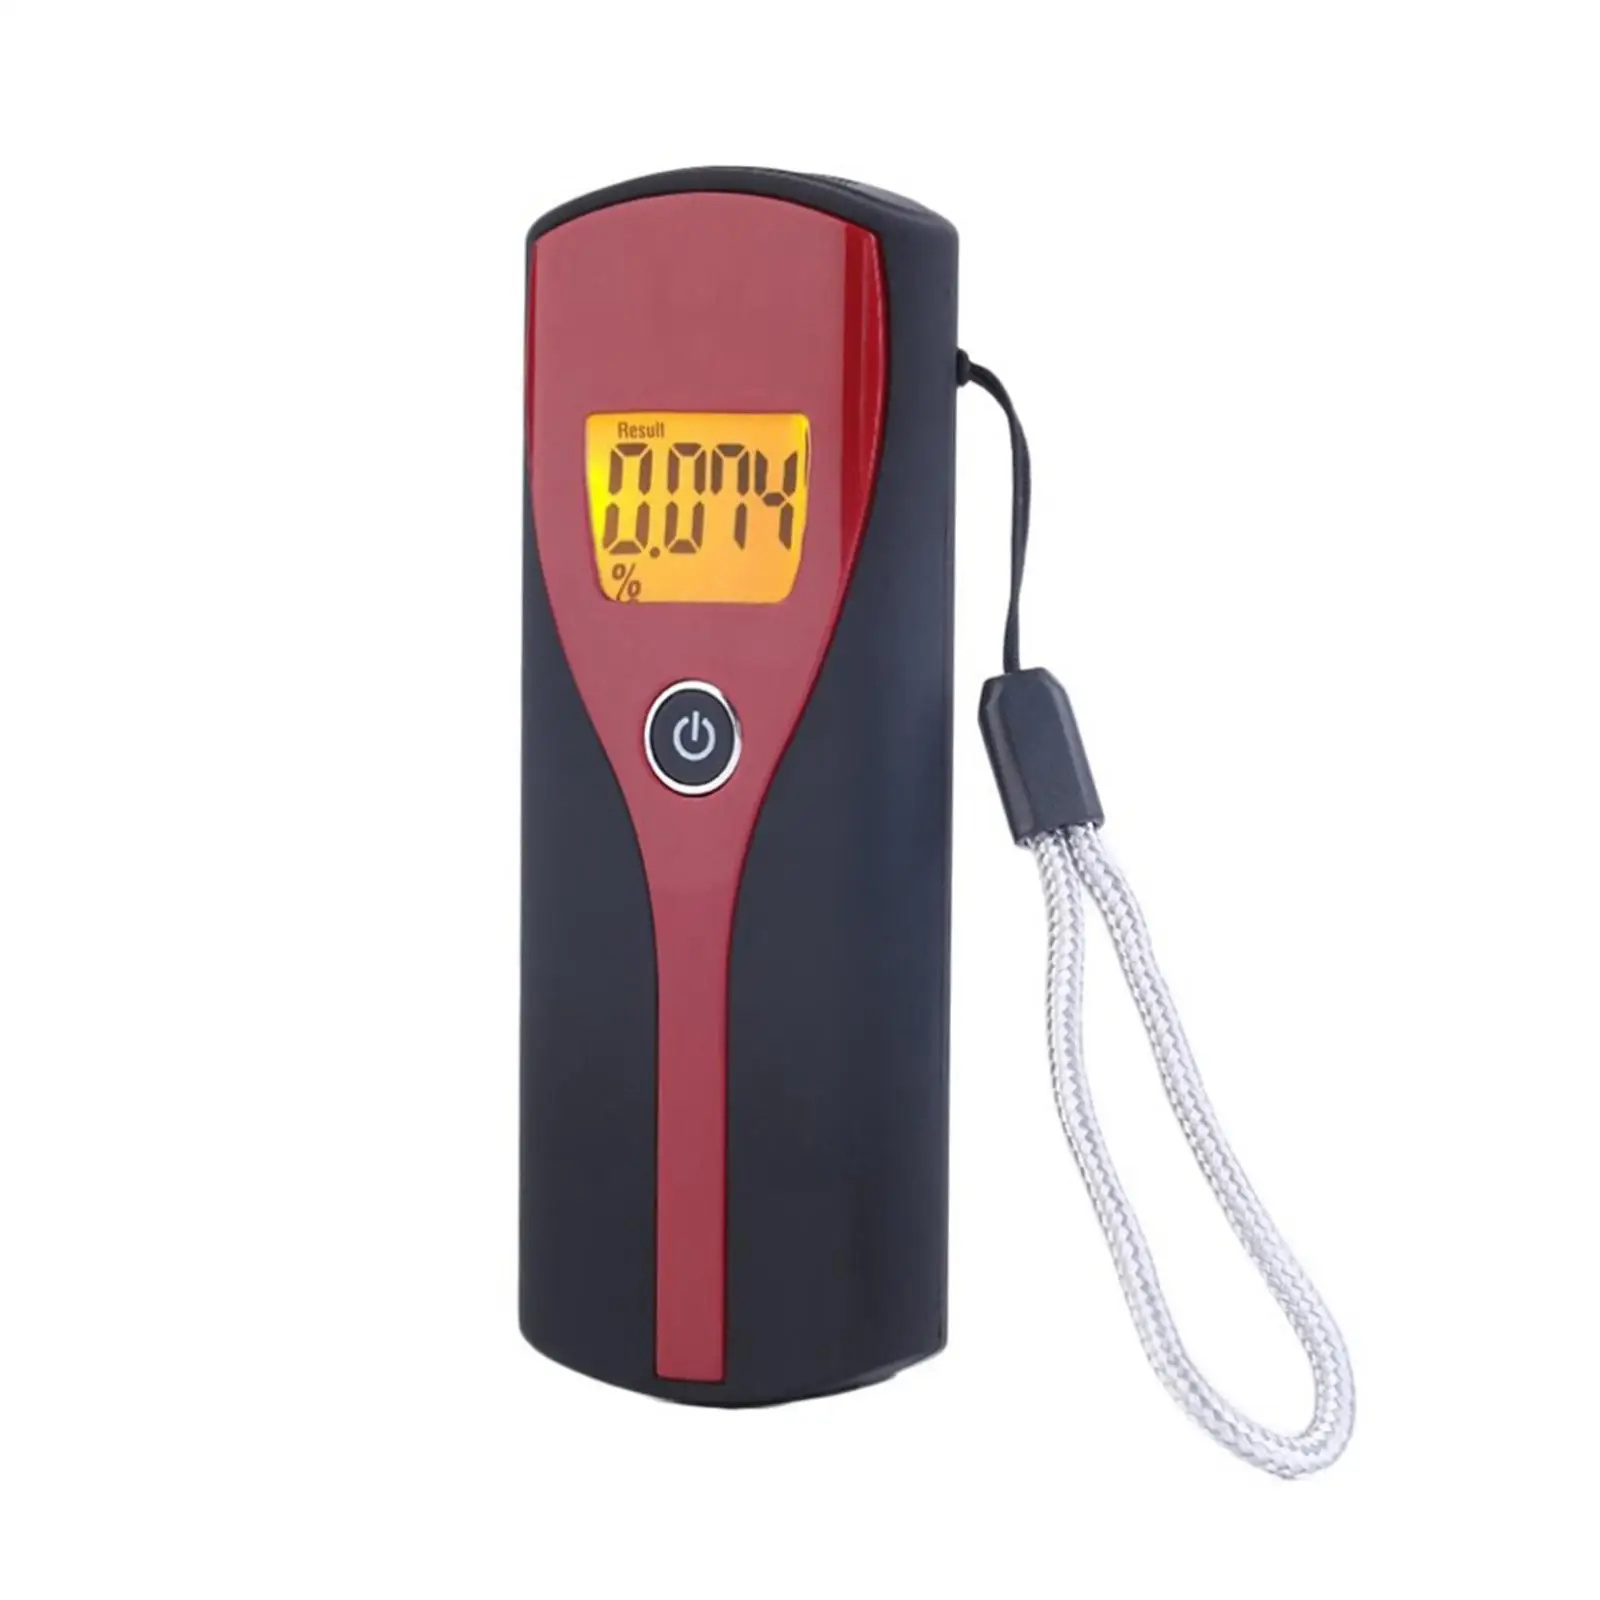 Sensor Breath   Detector, , with Digital LCD Screen, Non--Accuracy Fast Portable for Home Use